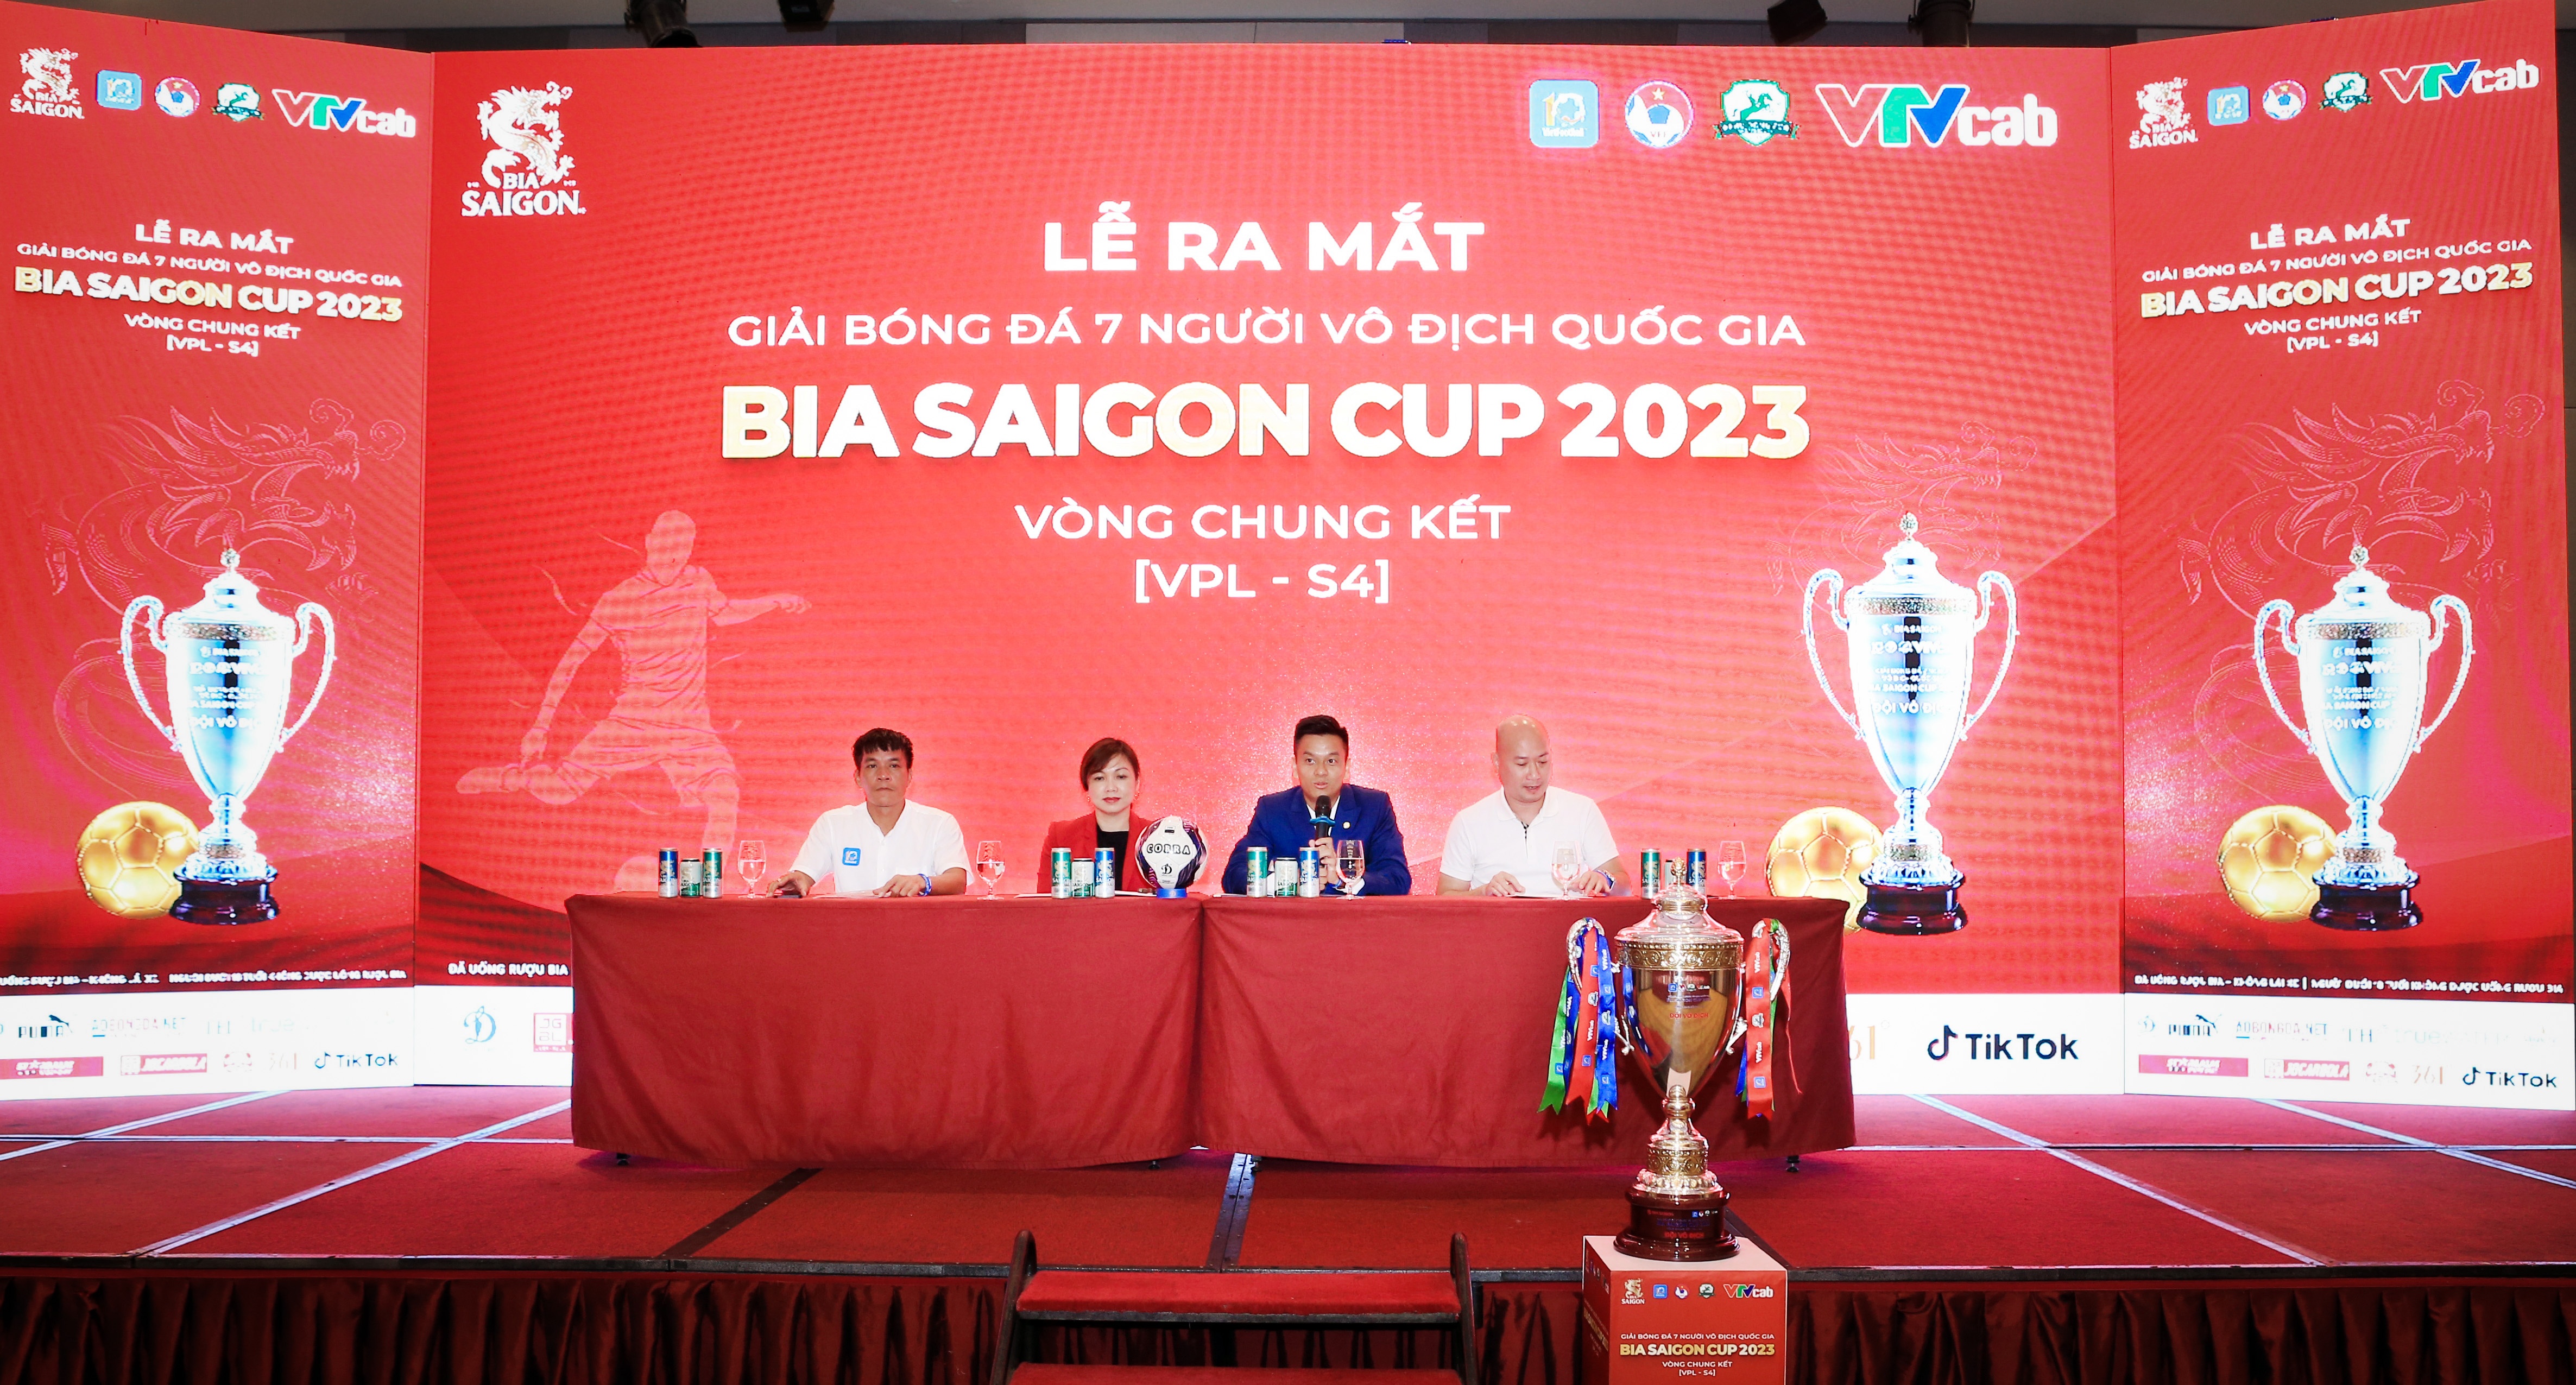 NATIONAL FINALE OF THE SEVEN-A-SIDE VIETNAM PREMIER LEAGUE - BIA SAIGON CUP 2023 (VPL-S4) TO KICK OFF IN HANOI FROM 24th to 27th AUGUST 2023